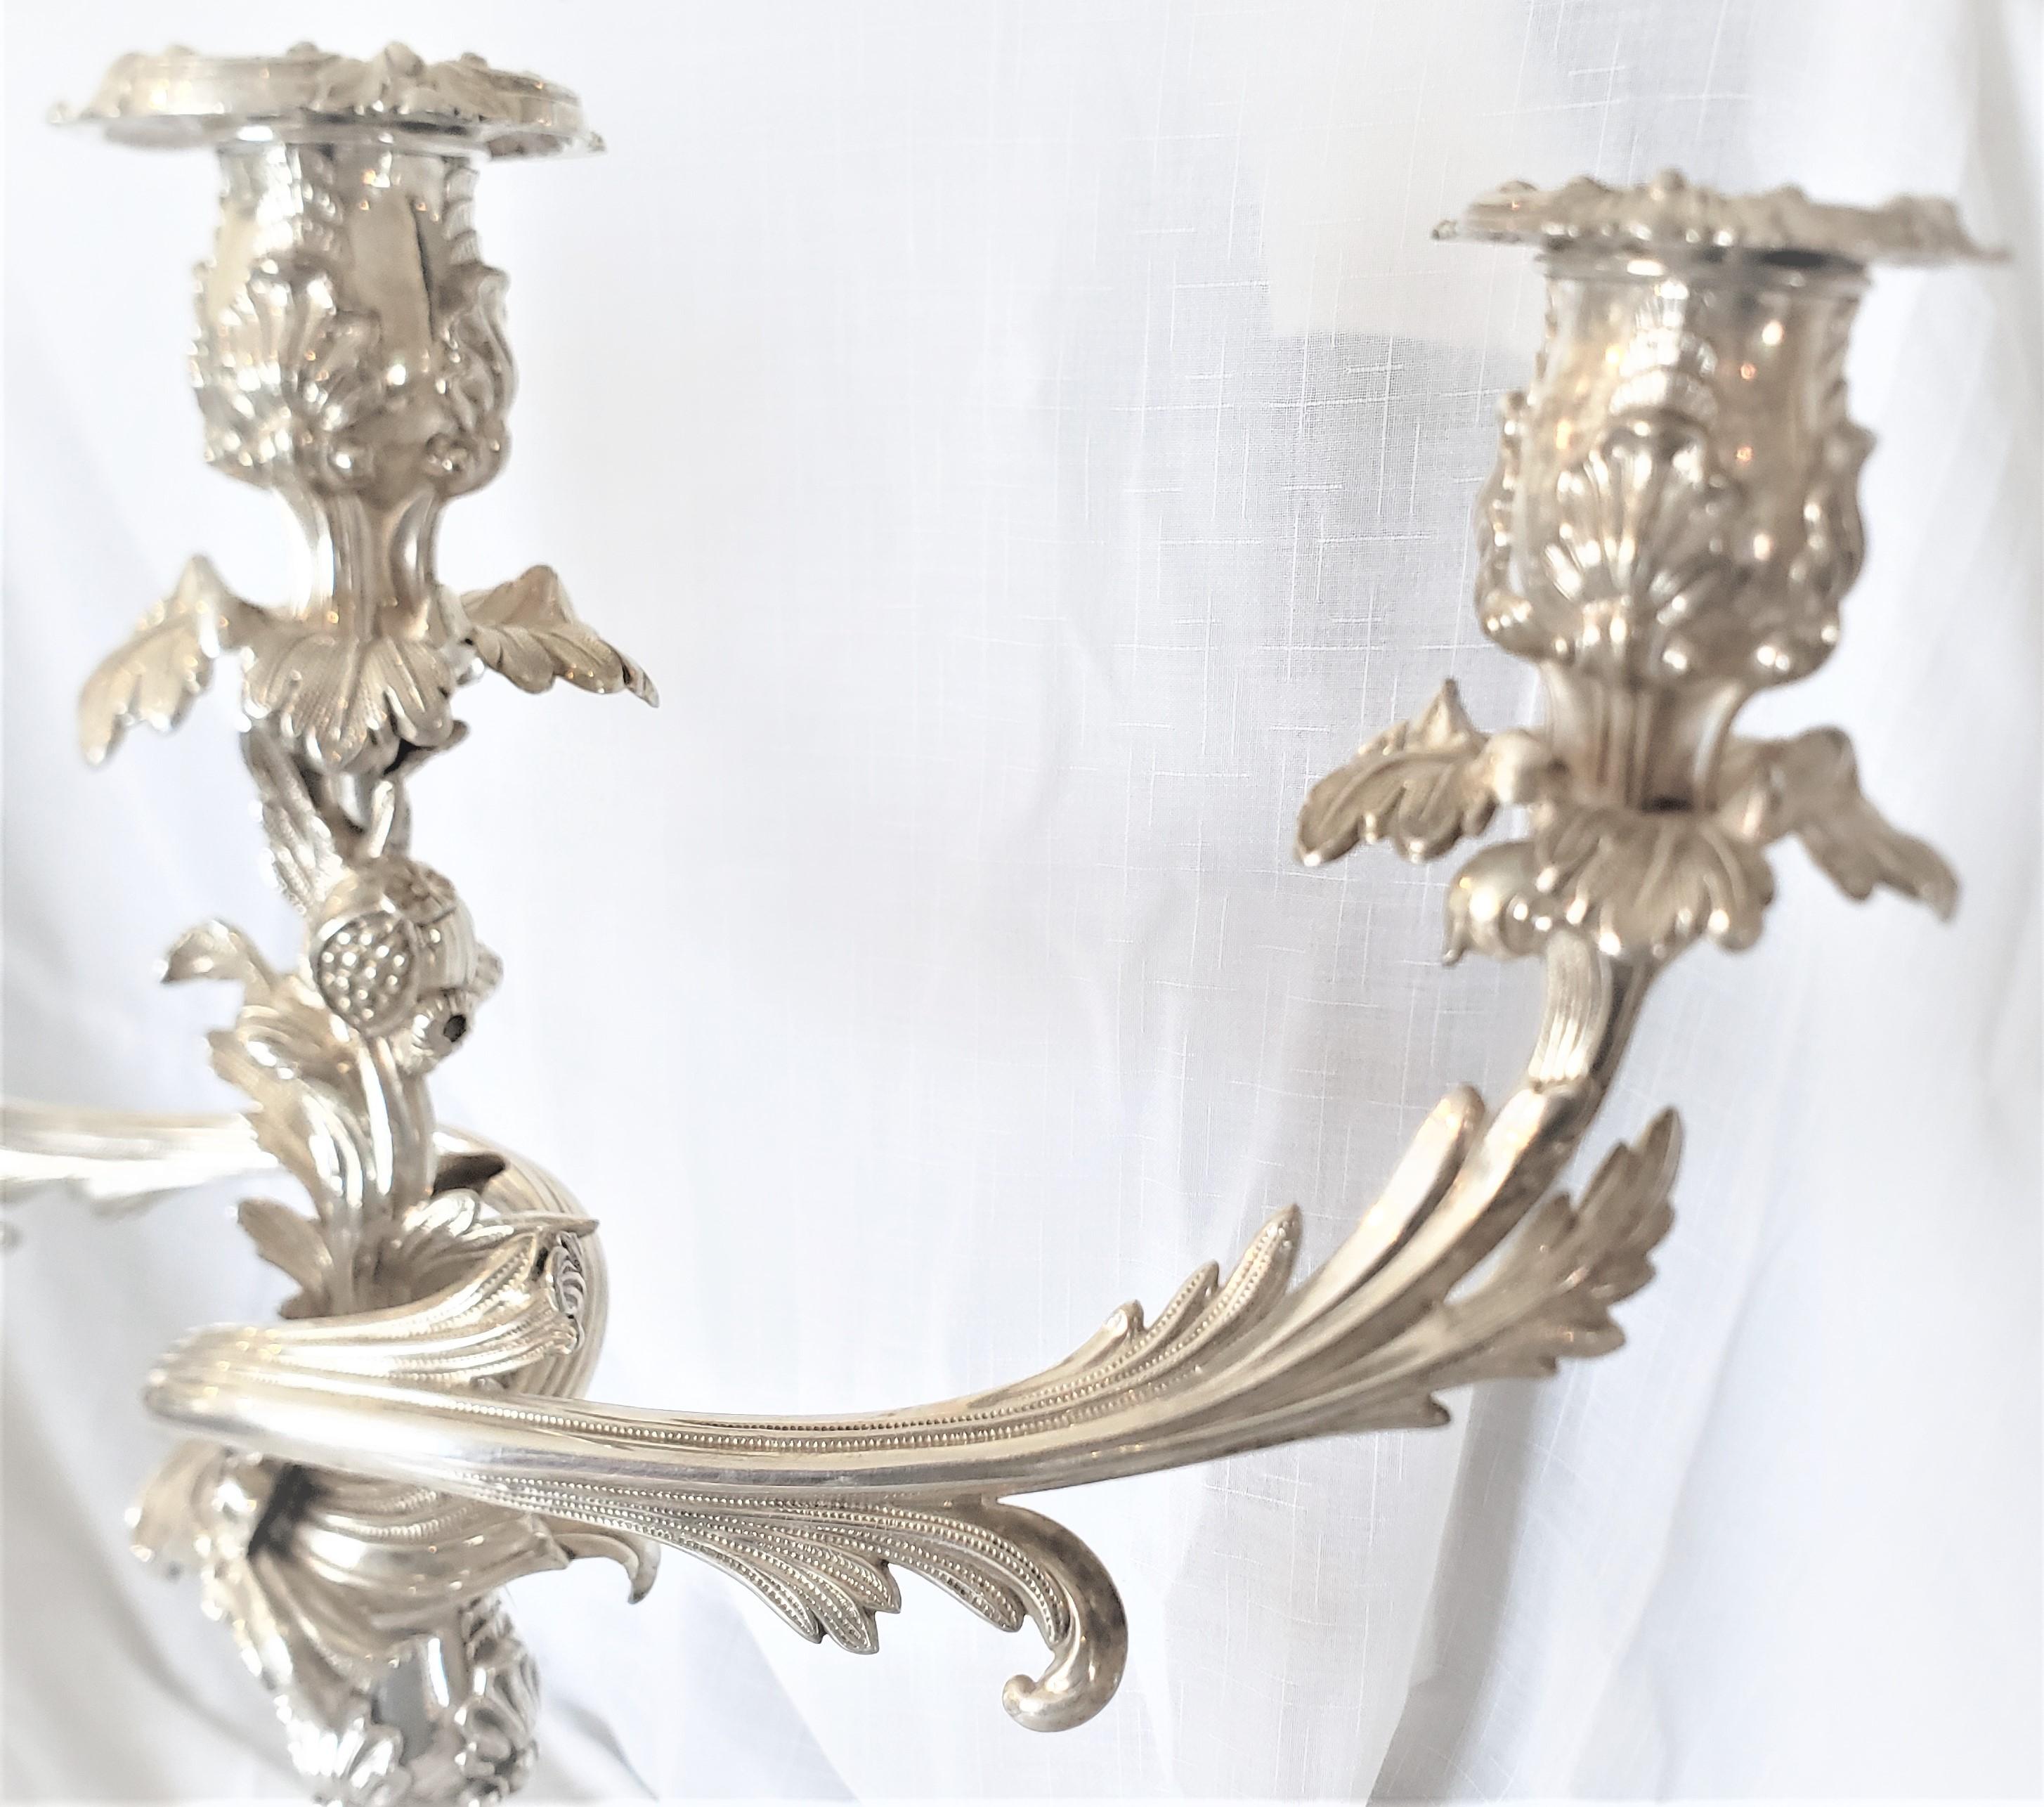 Pair of Antique Sheffield Plate Convertible 3 Branch Candlesticks or Candelabra For Sale 3